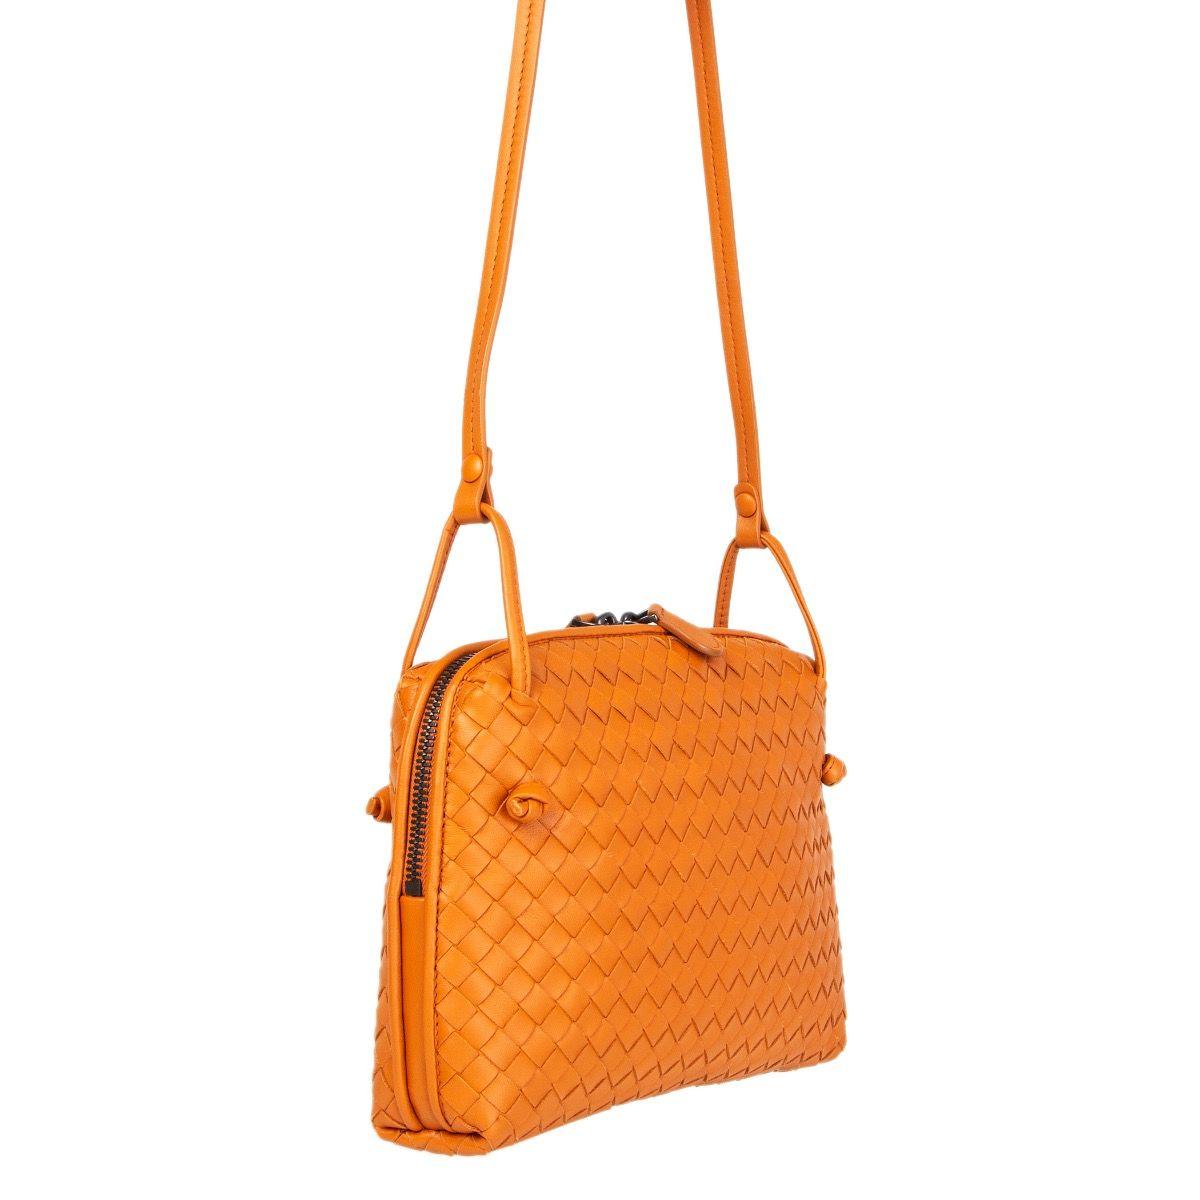 Bottega Veneta 'Nodini' cross-body in orange woven nappa leather. Opens with a two-way zipper on top. Lined in dark taupe suede with one open pocket against the front and a zipper pocket against the back. Has an adjustable shoulder strap. Comes with